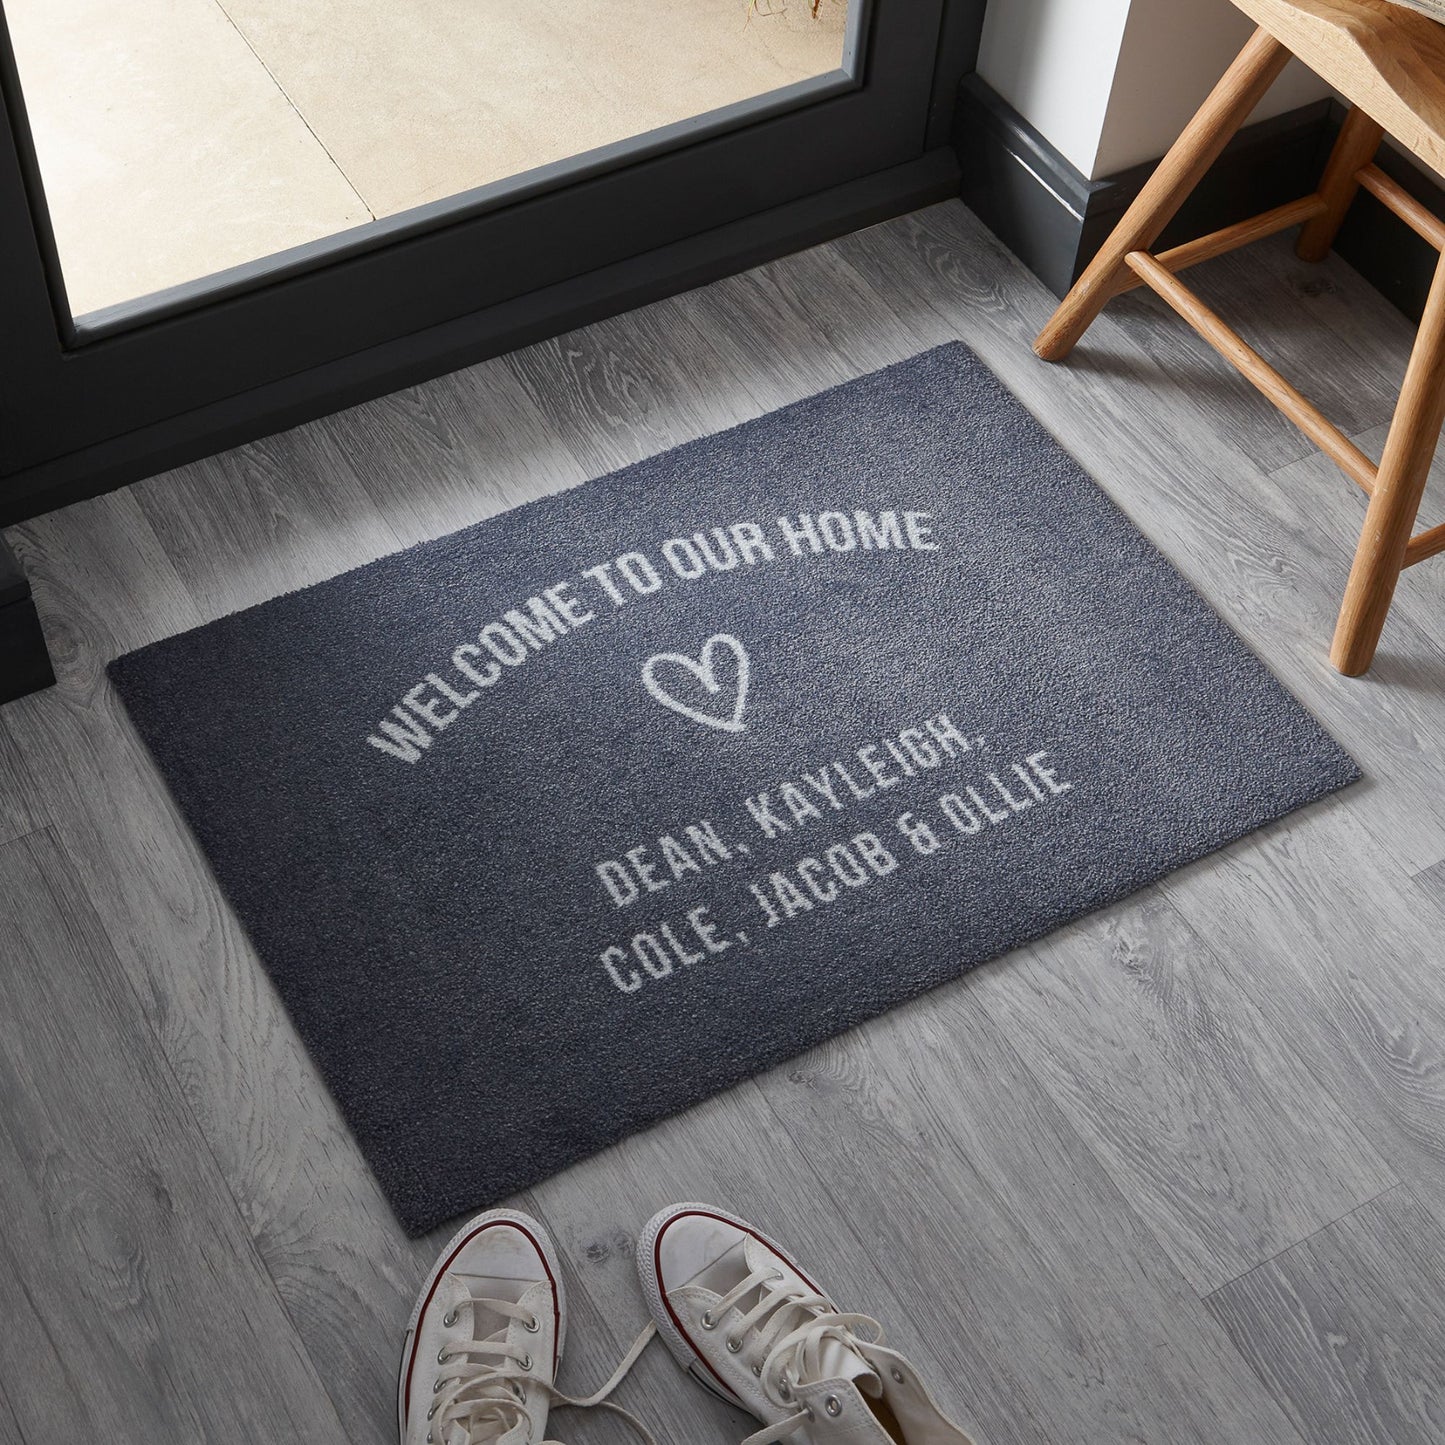 Our Home Personalised Doormat